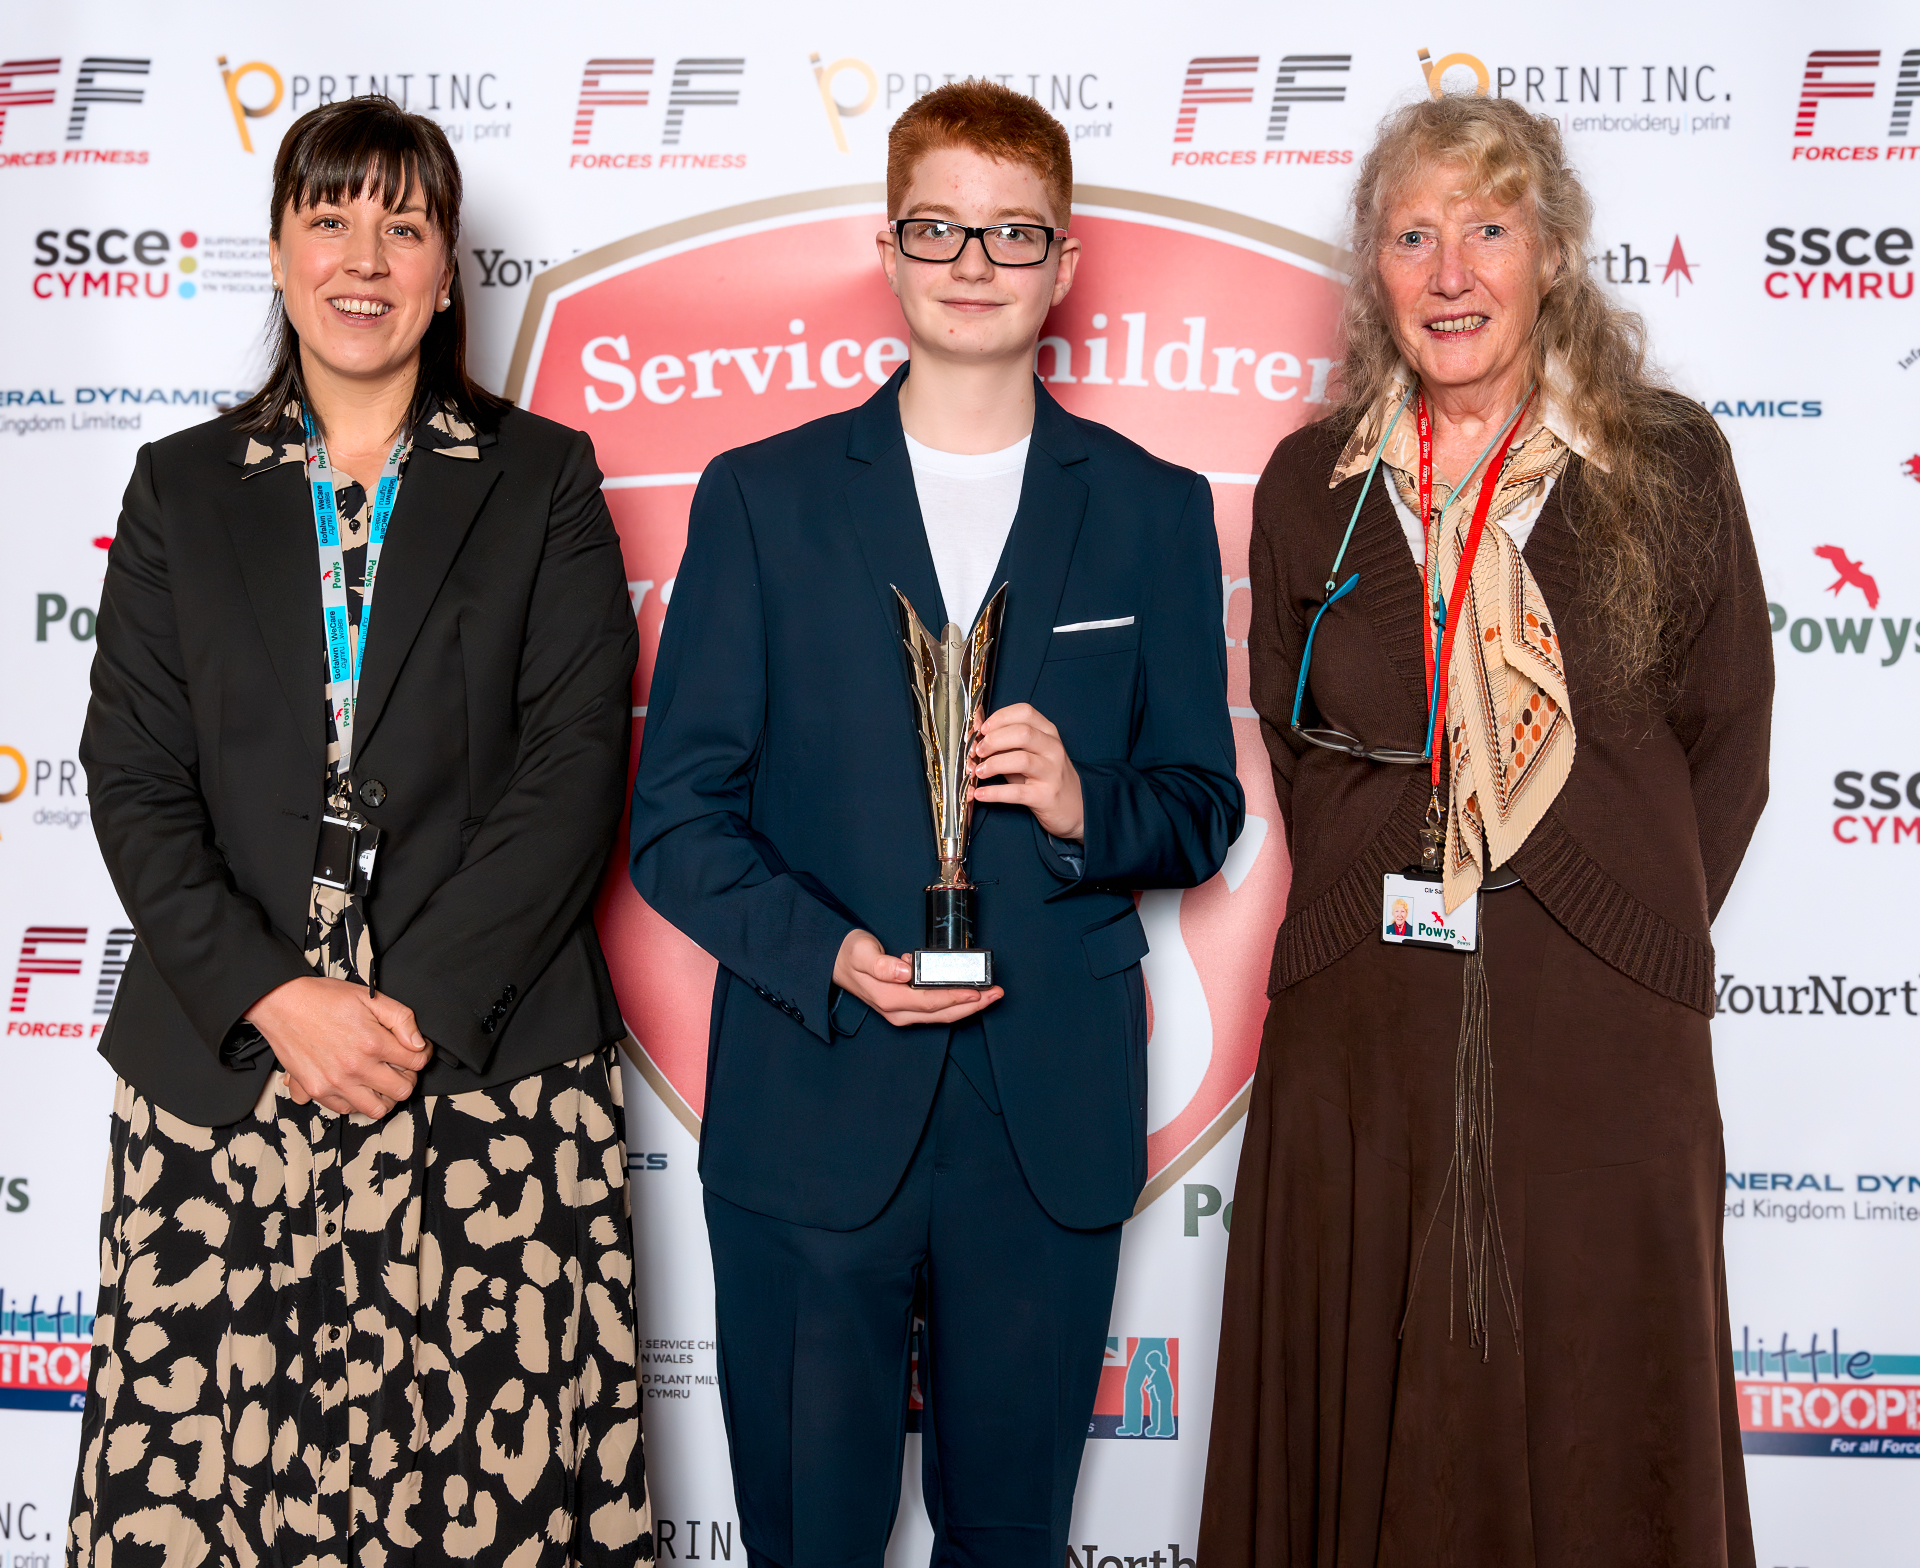 Introducing The Winners At The Service Children Awards Cymru 2023